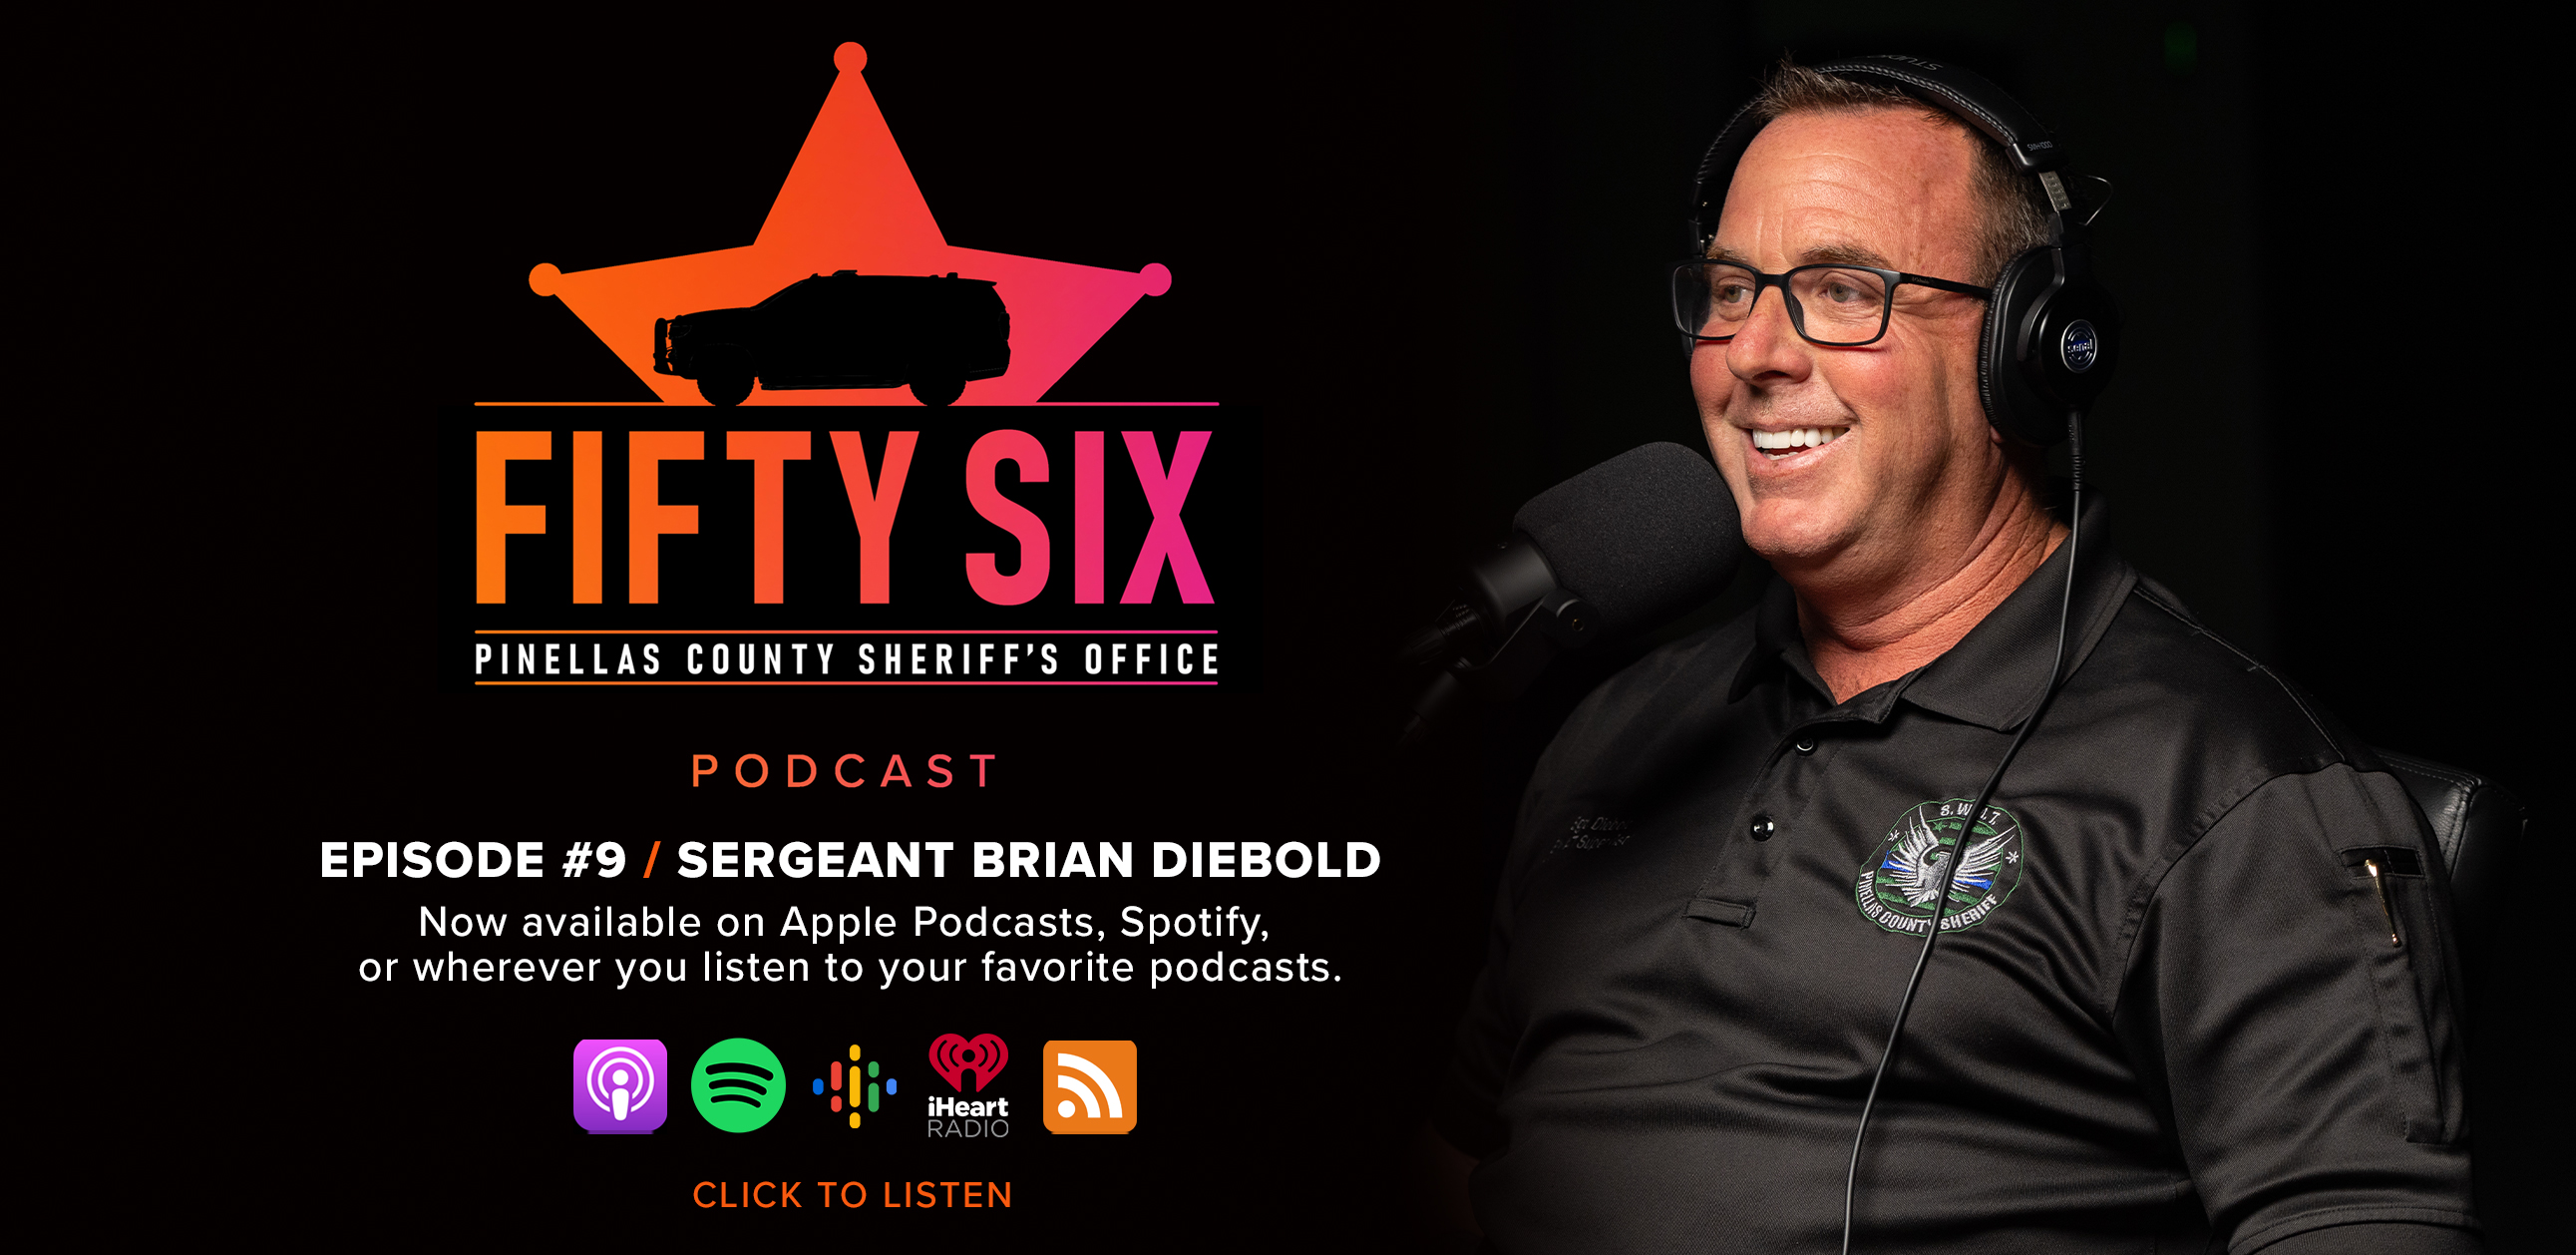 56 Podcast, Episode 9 Sergeant Brian Diebold, now available wherever you listen to your favorite podcasts.